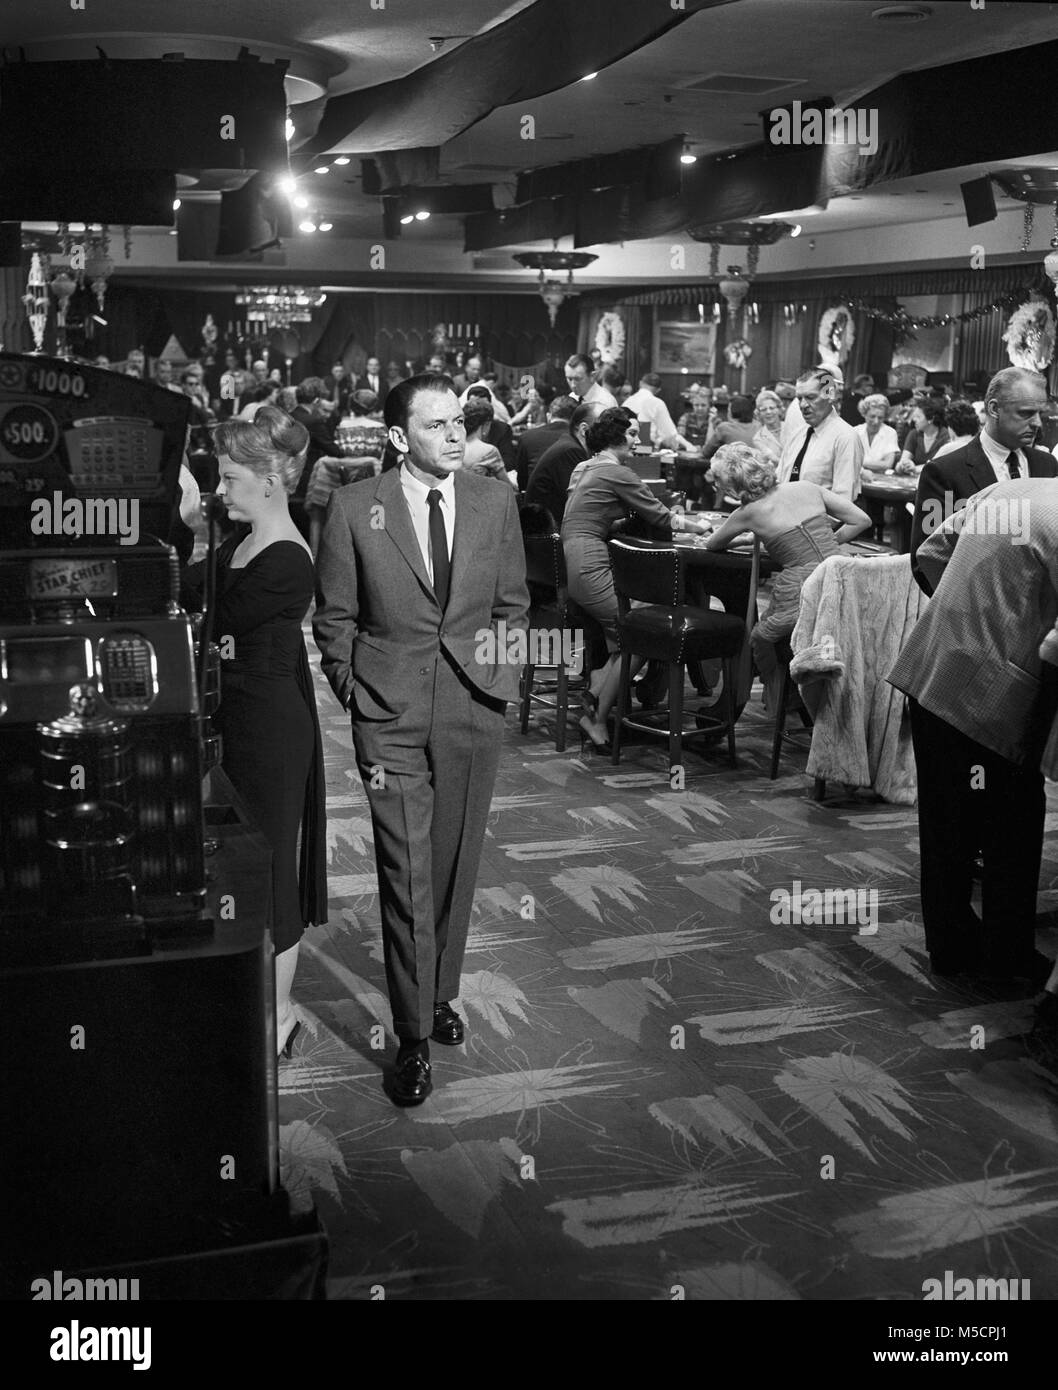 Frank Sinatra walking the casino floor in the movie Ocean’s Eleven, 1960. Image from negative. Stock Photo